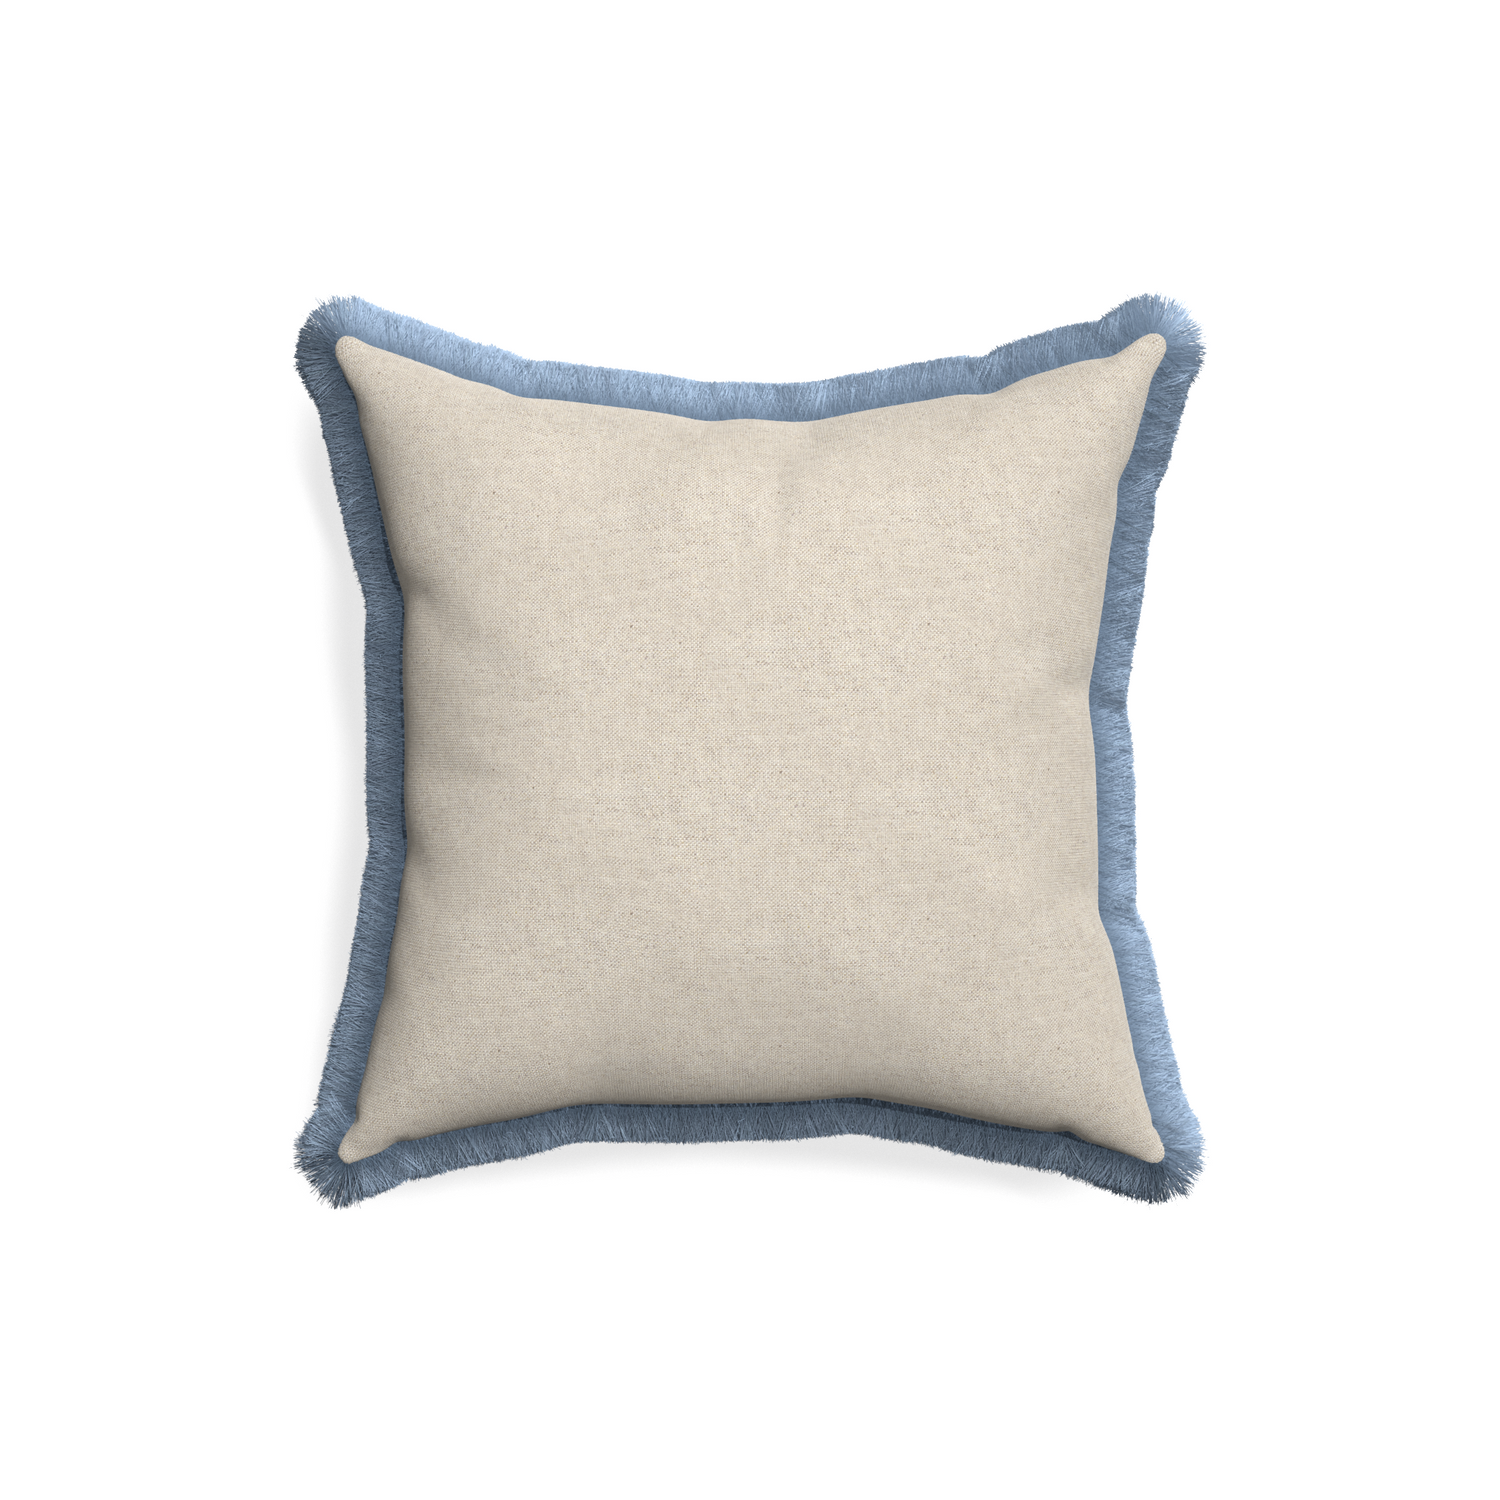 18-square oat custom light brownpillow with sky fringe on white background